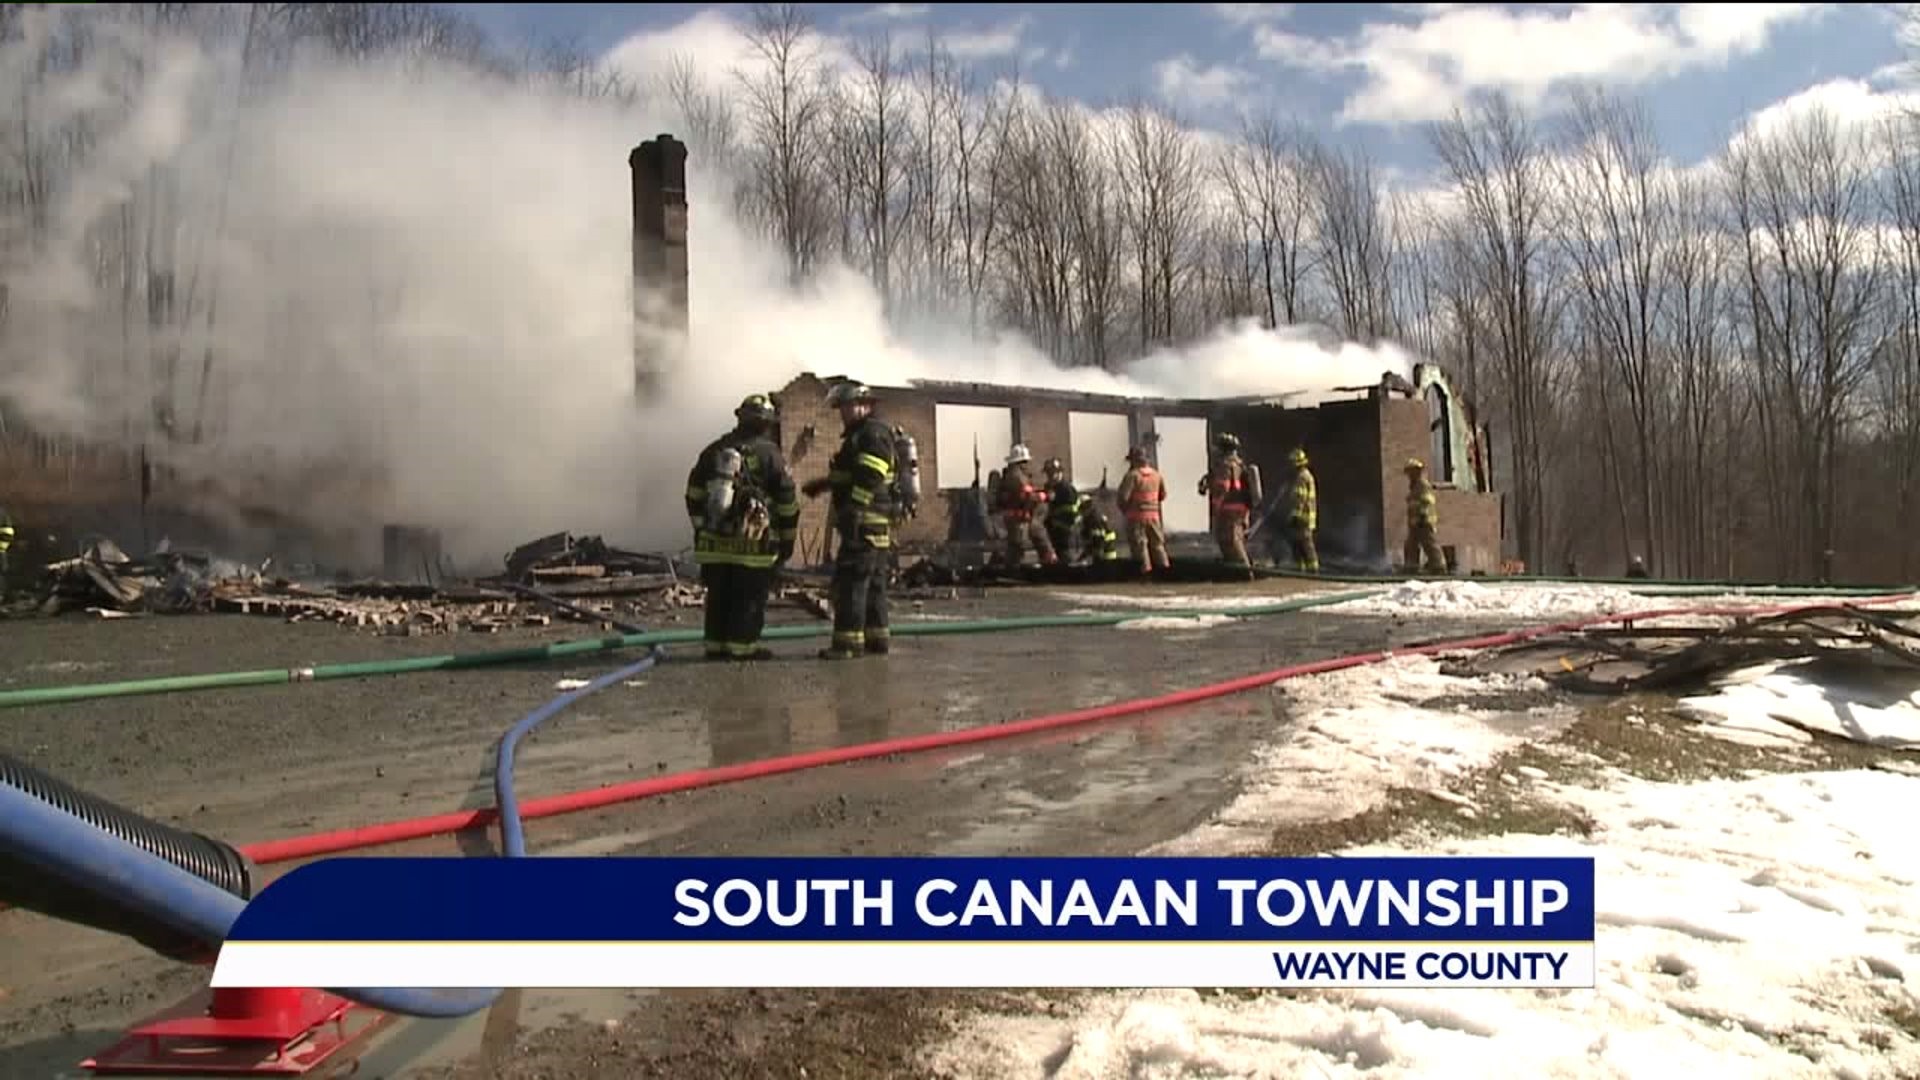 Windy Day and Hot Ashes to Blame for Wayne County Fire